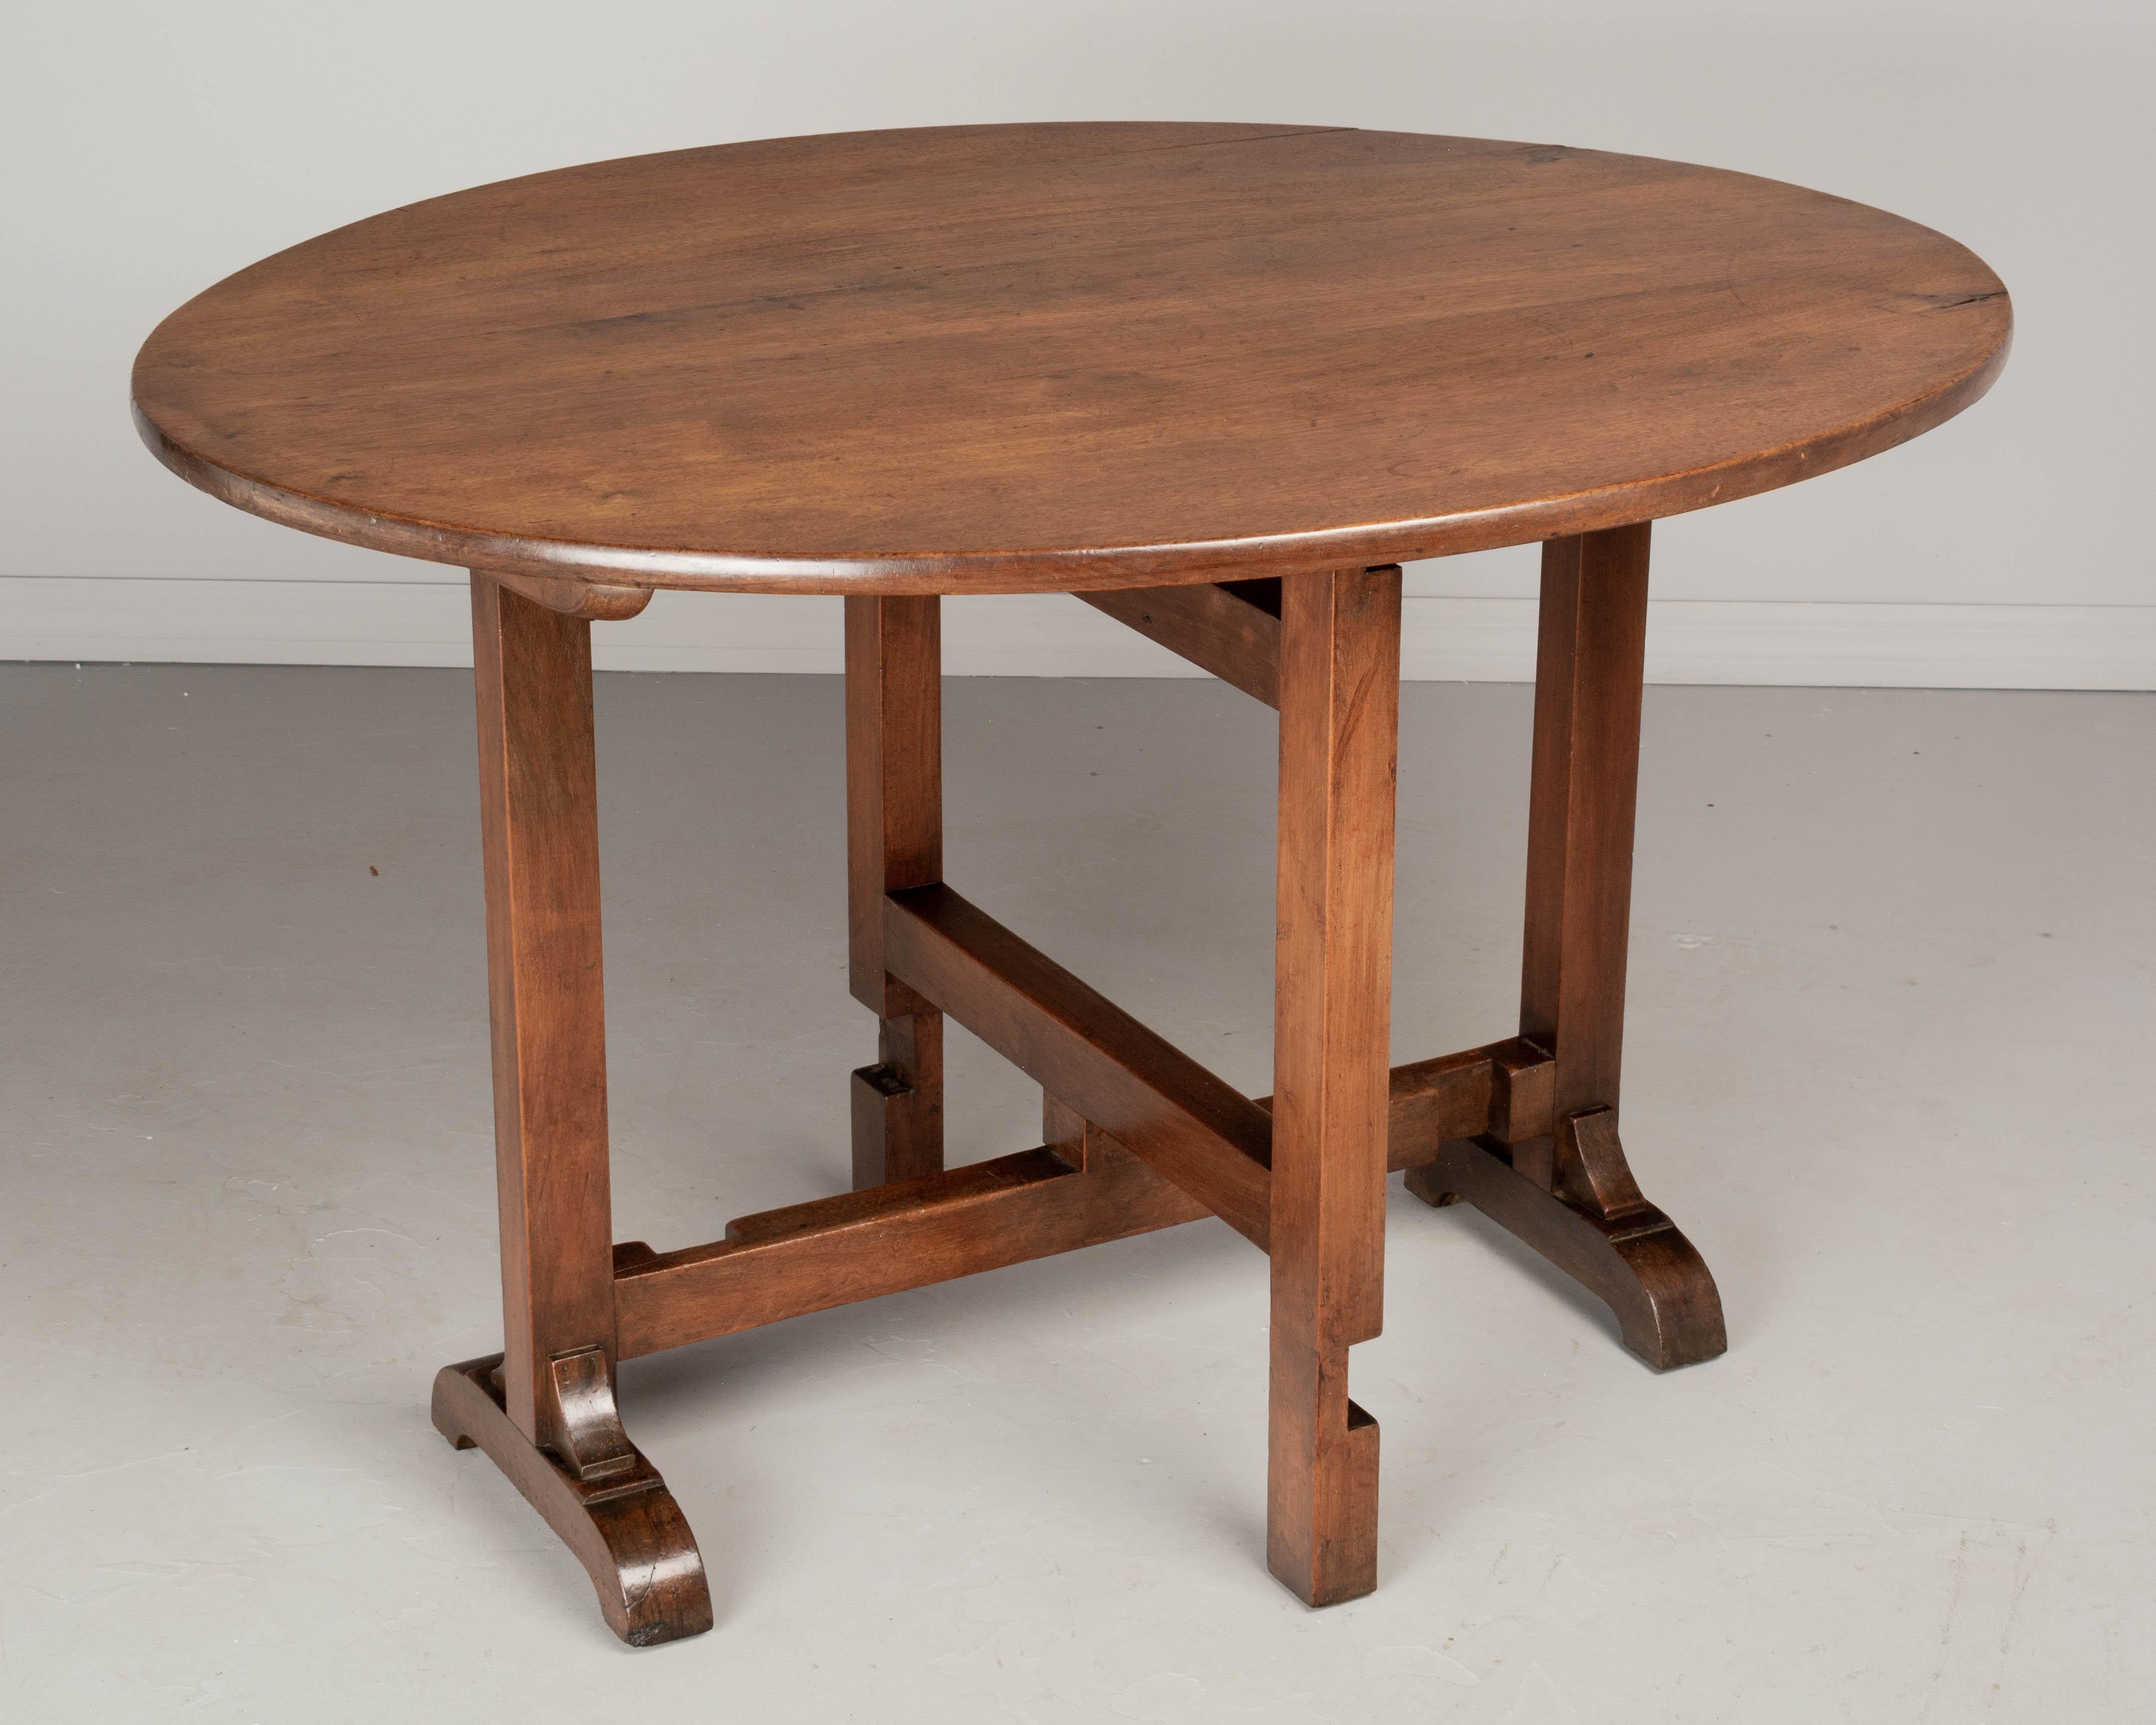 Hand-Crafted 19th Century French Wine Tasting Table or Tilt-Top Table